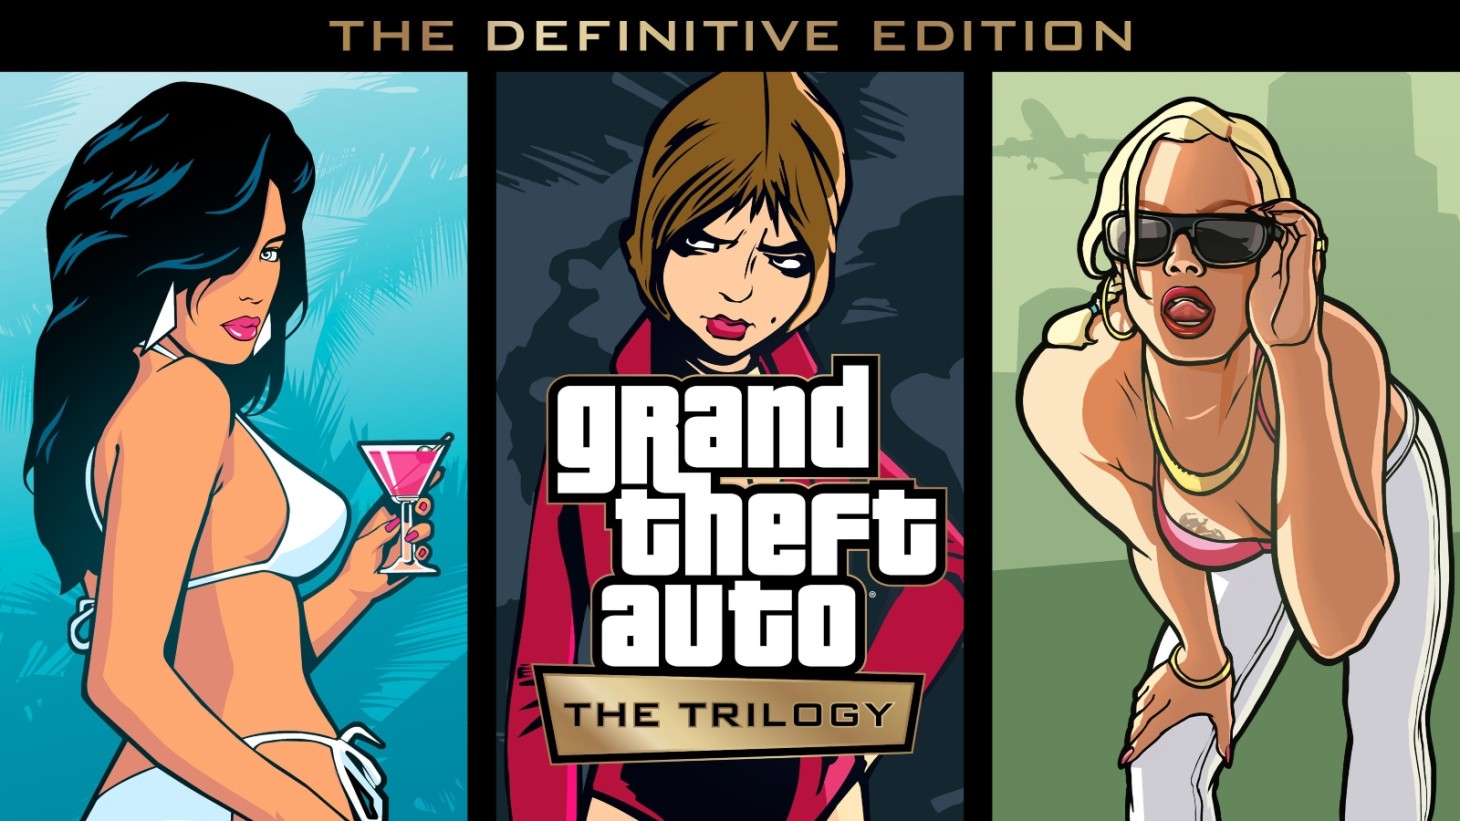 Grand Theft Auto Trilogy - Playstation 2 : Target